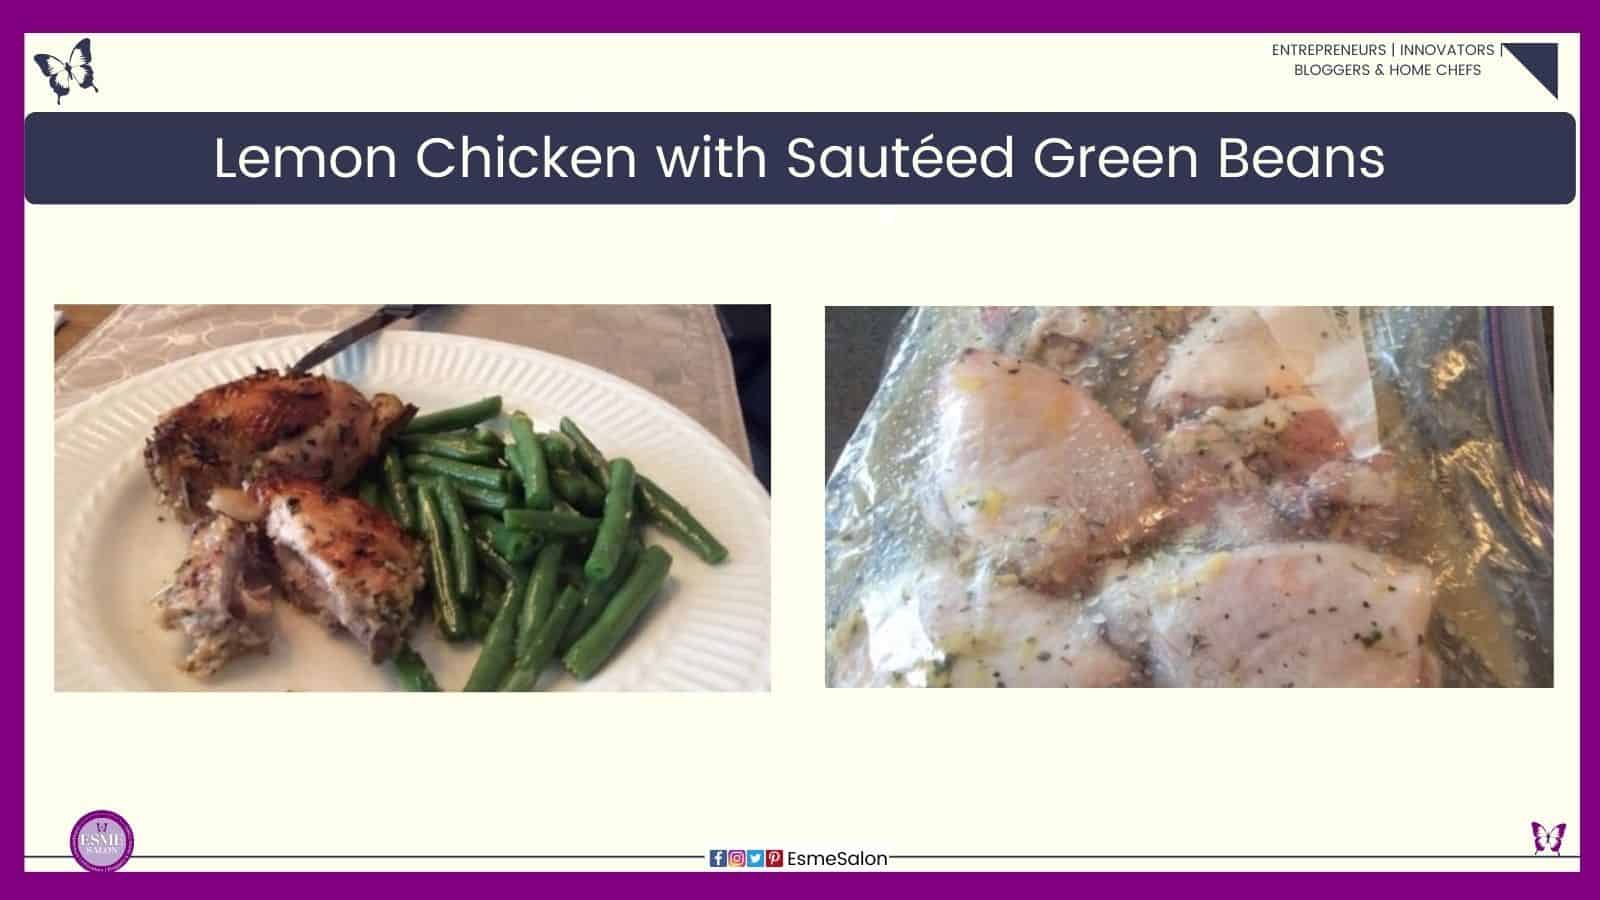 an image of a Ziploc bag with lemon marinade and chicken as well as a white serving plate with cooked Lemon Chicken and Sautéed Green Beans